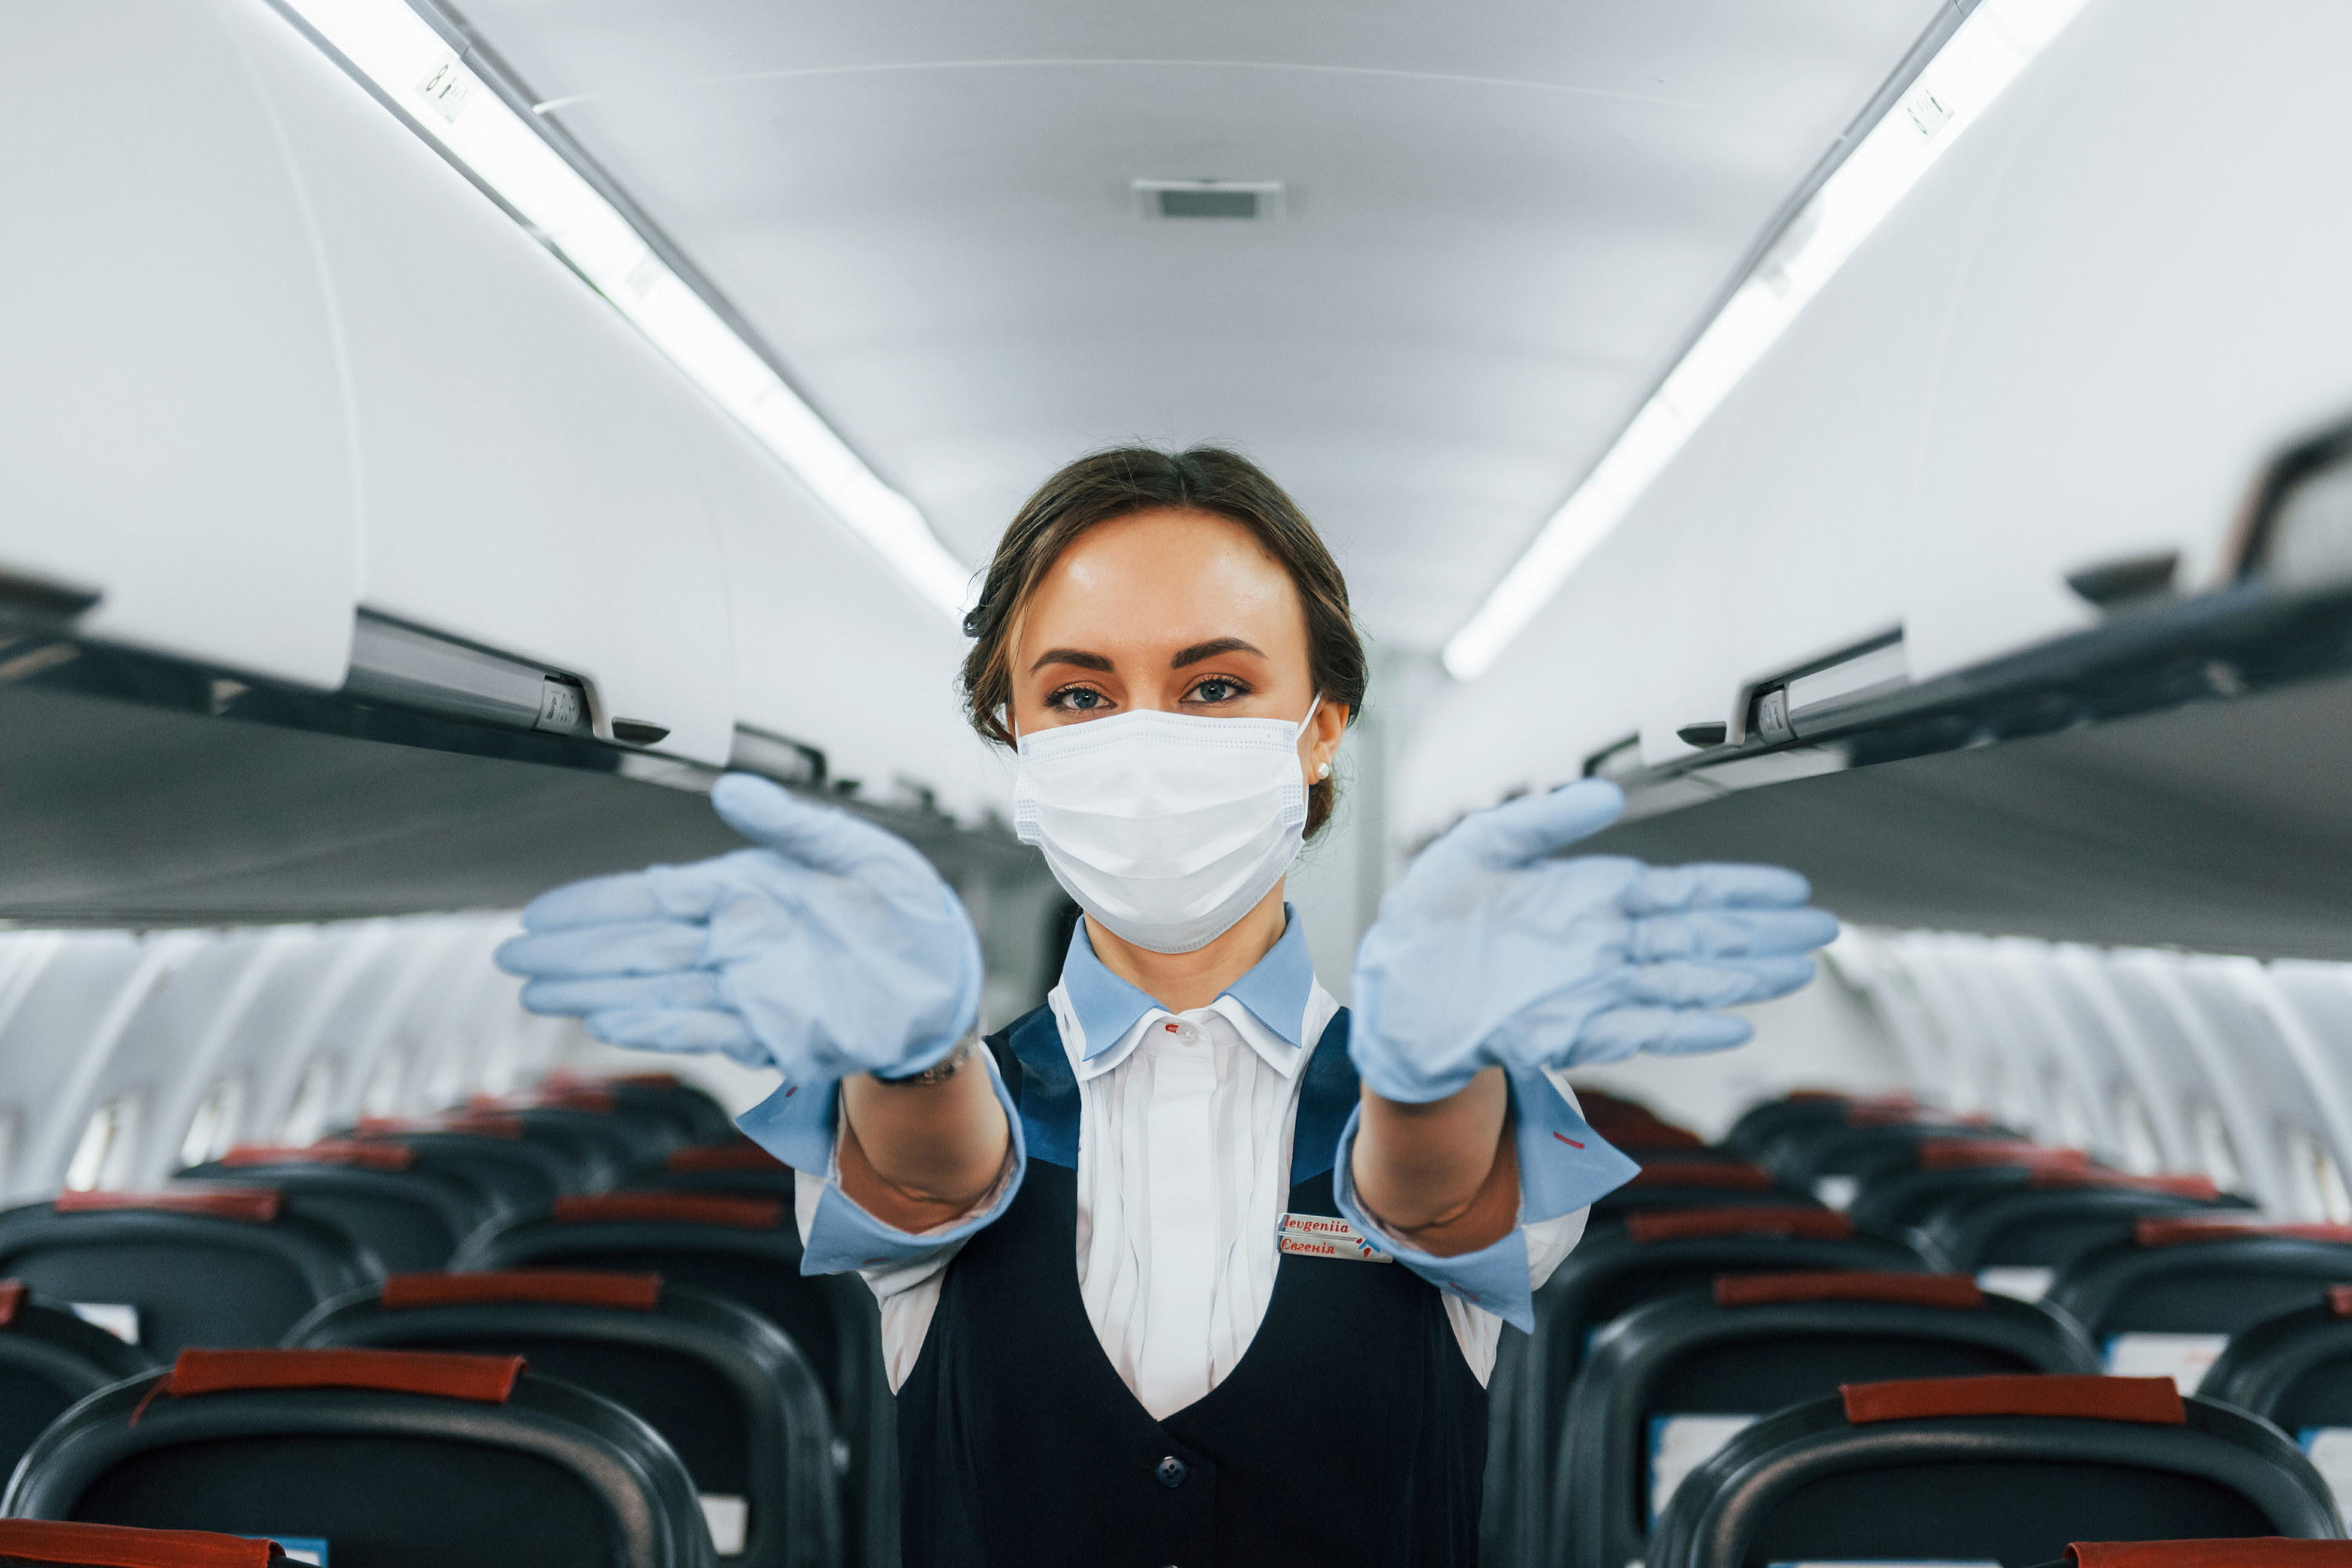 A flight attendant wearing a surgical mask on a plane